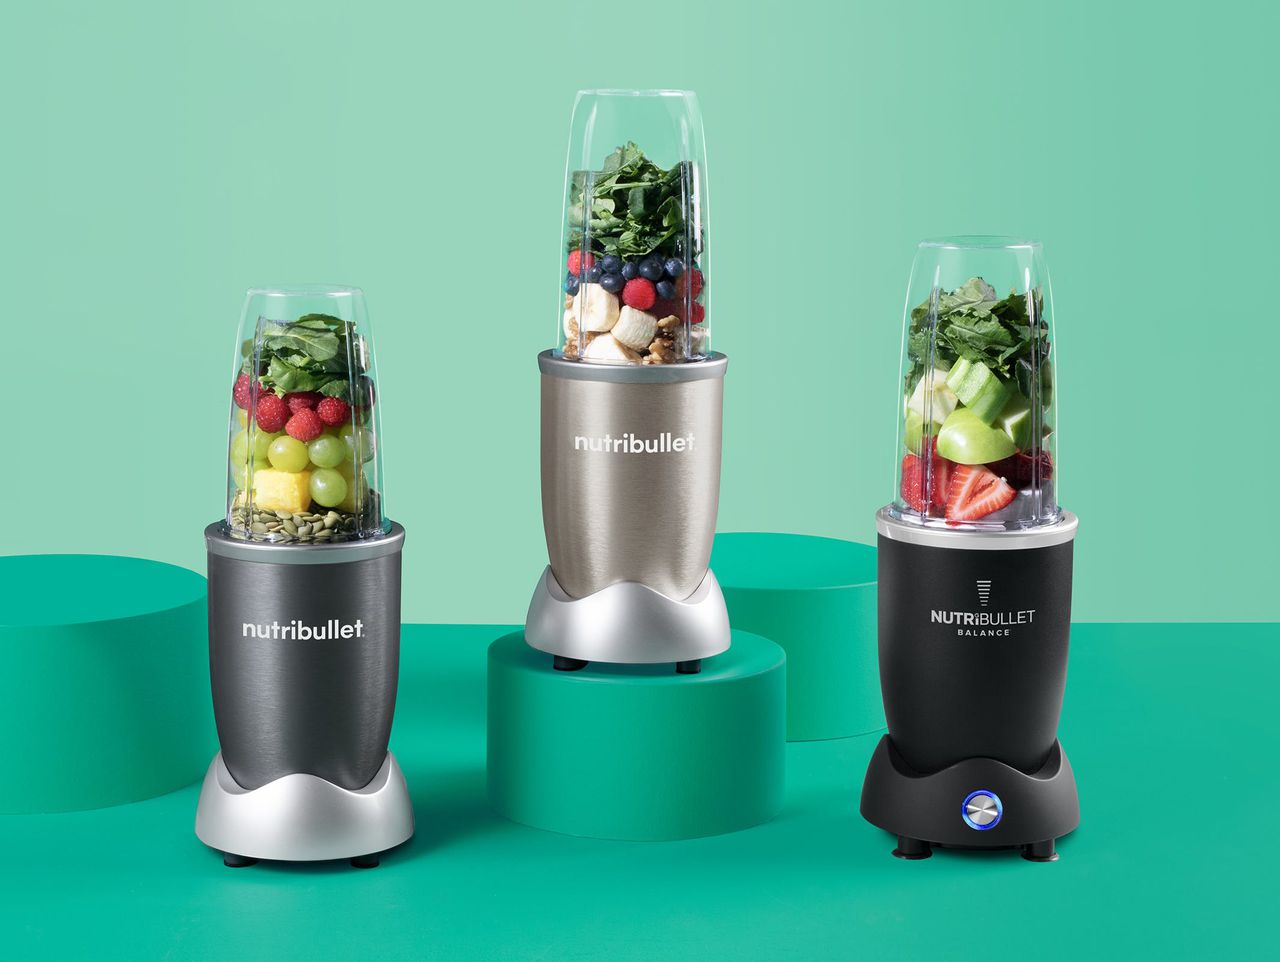 The hackers have done the same thing to a number of companies in the past, image via NutriBullet